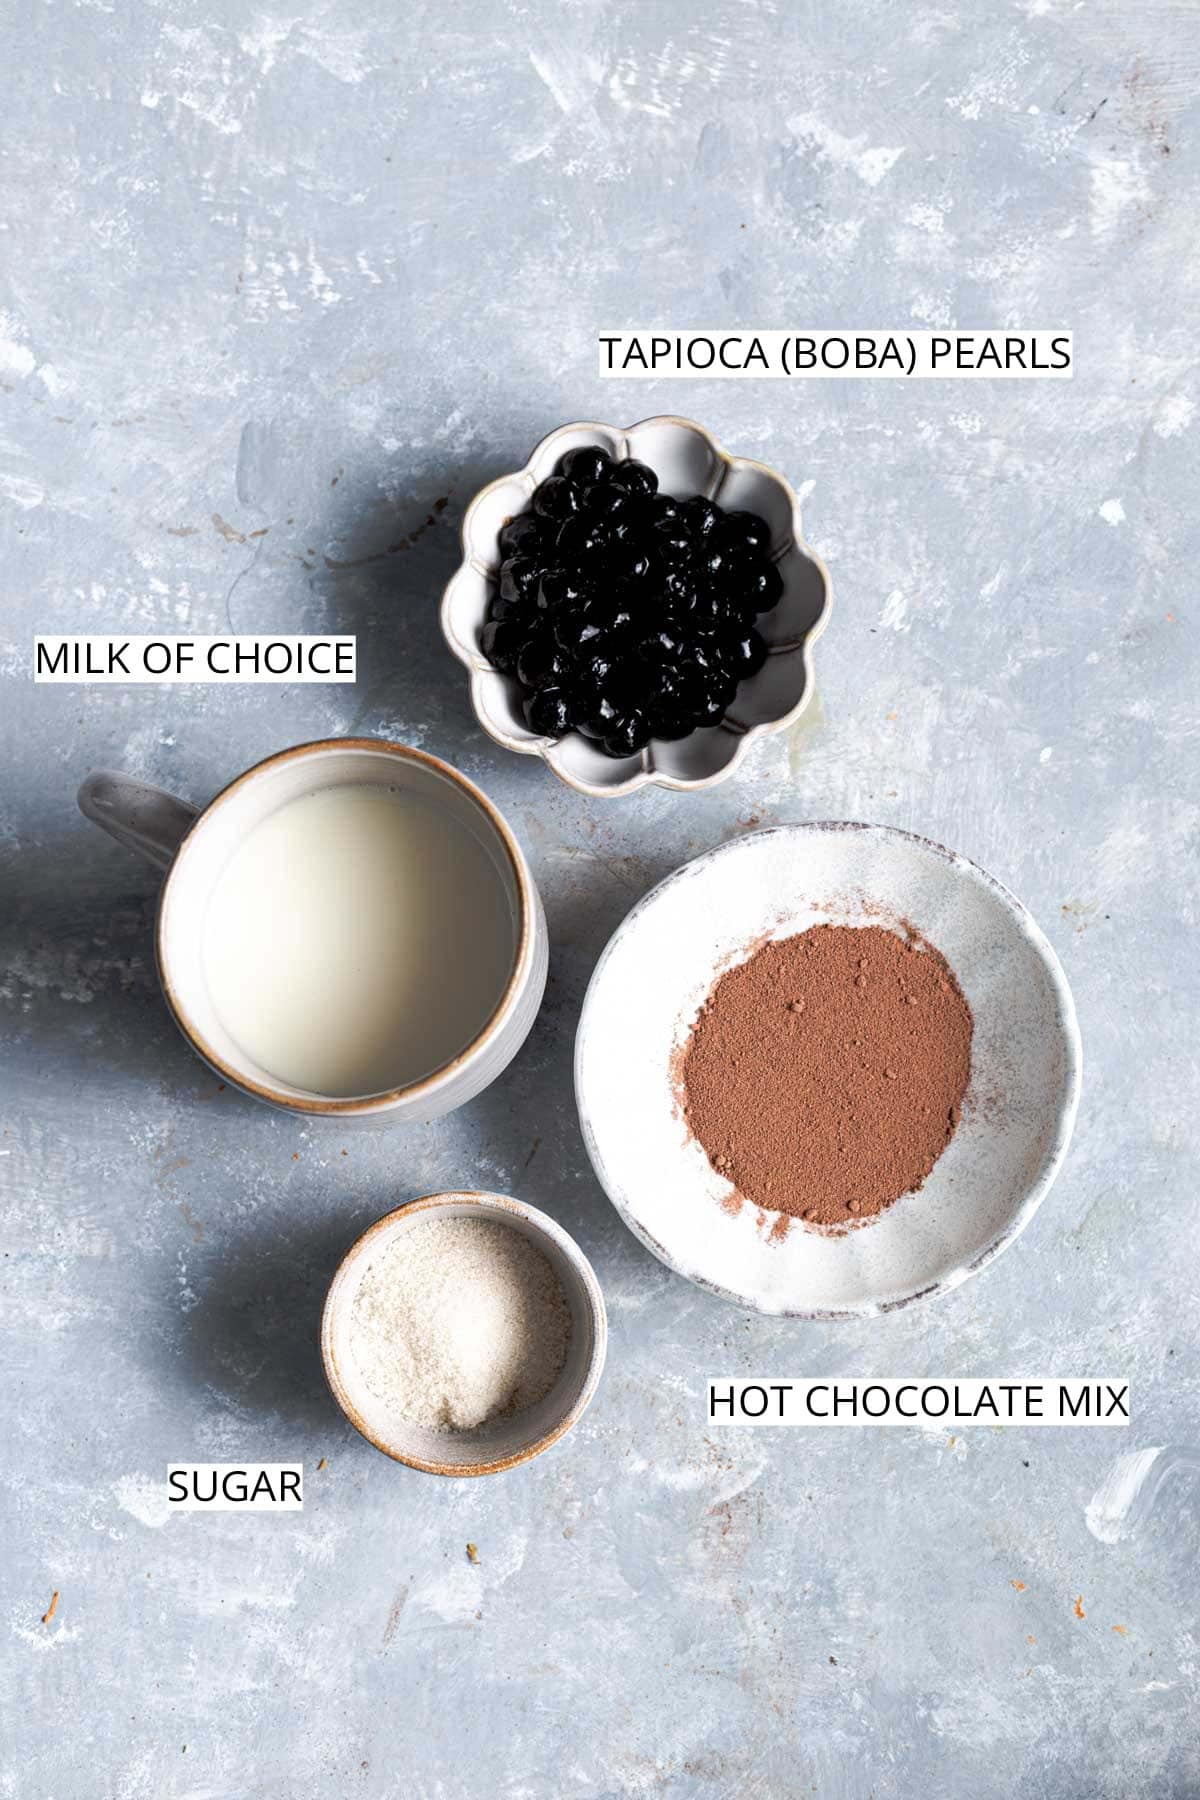 All the ingredients needed to make boba tea placed on a flat surface.